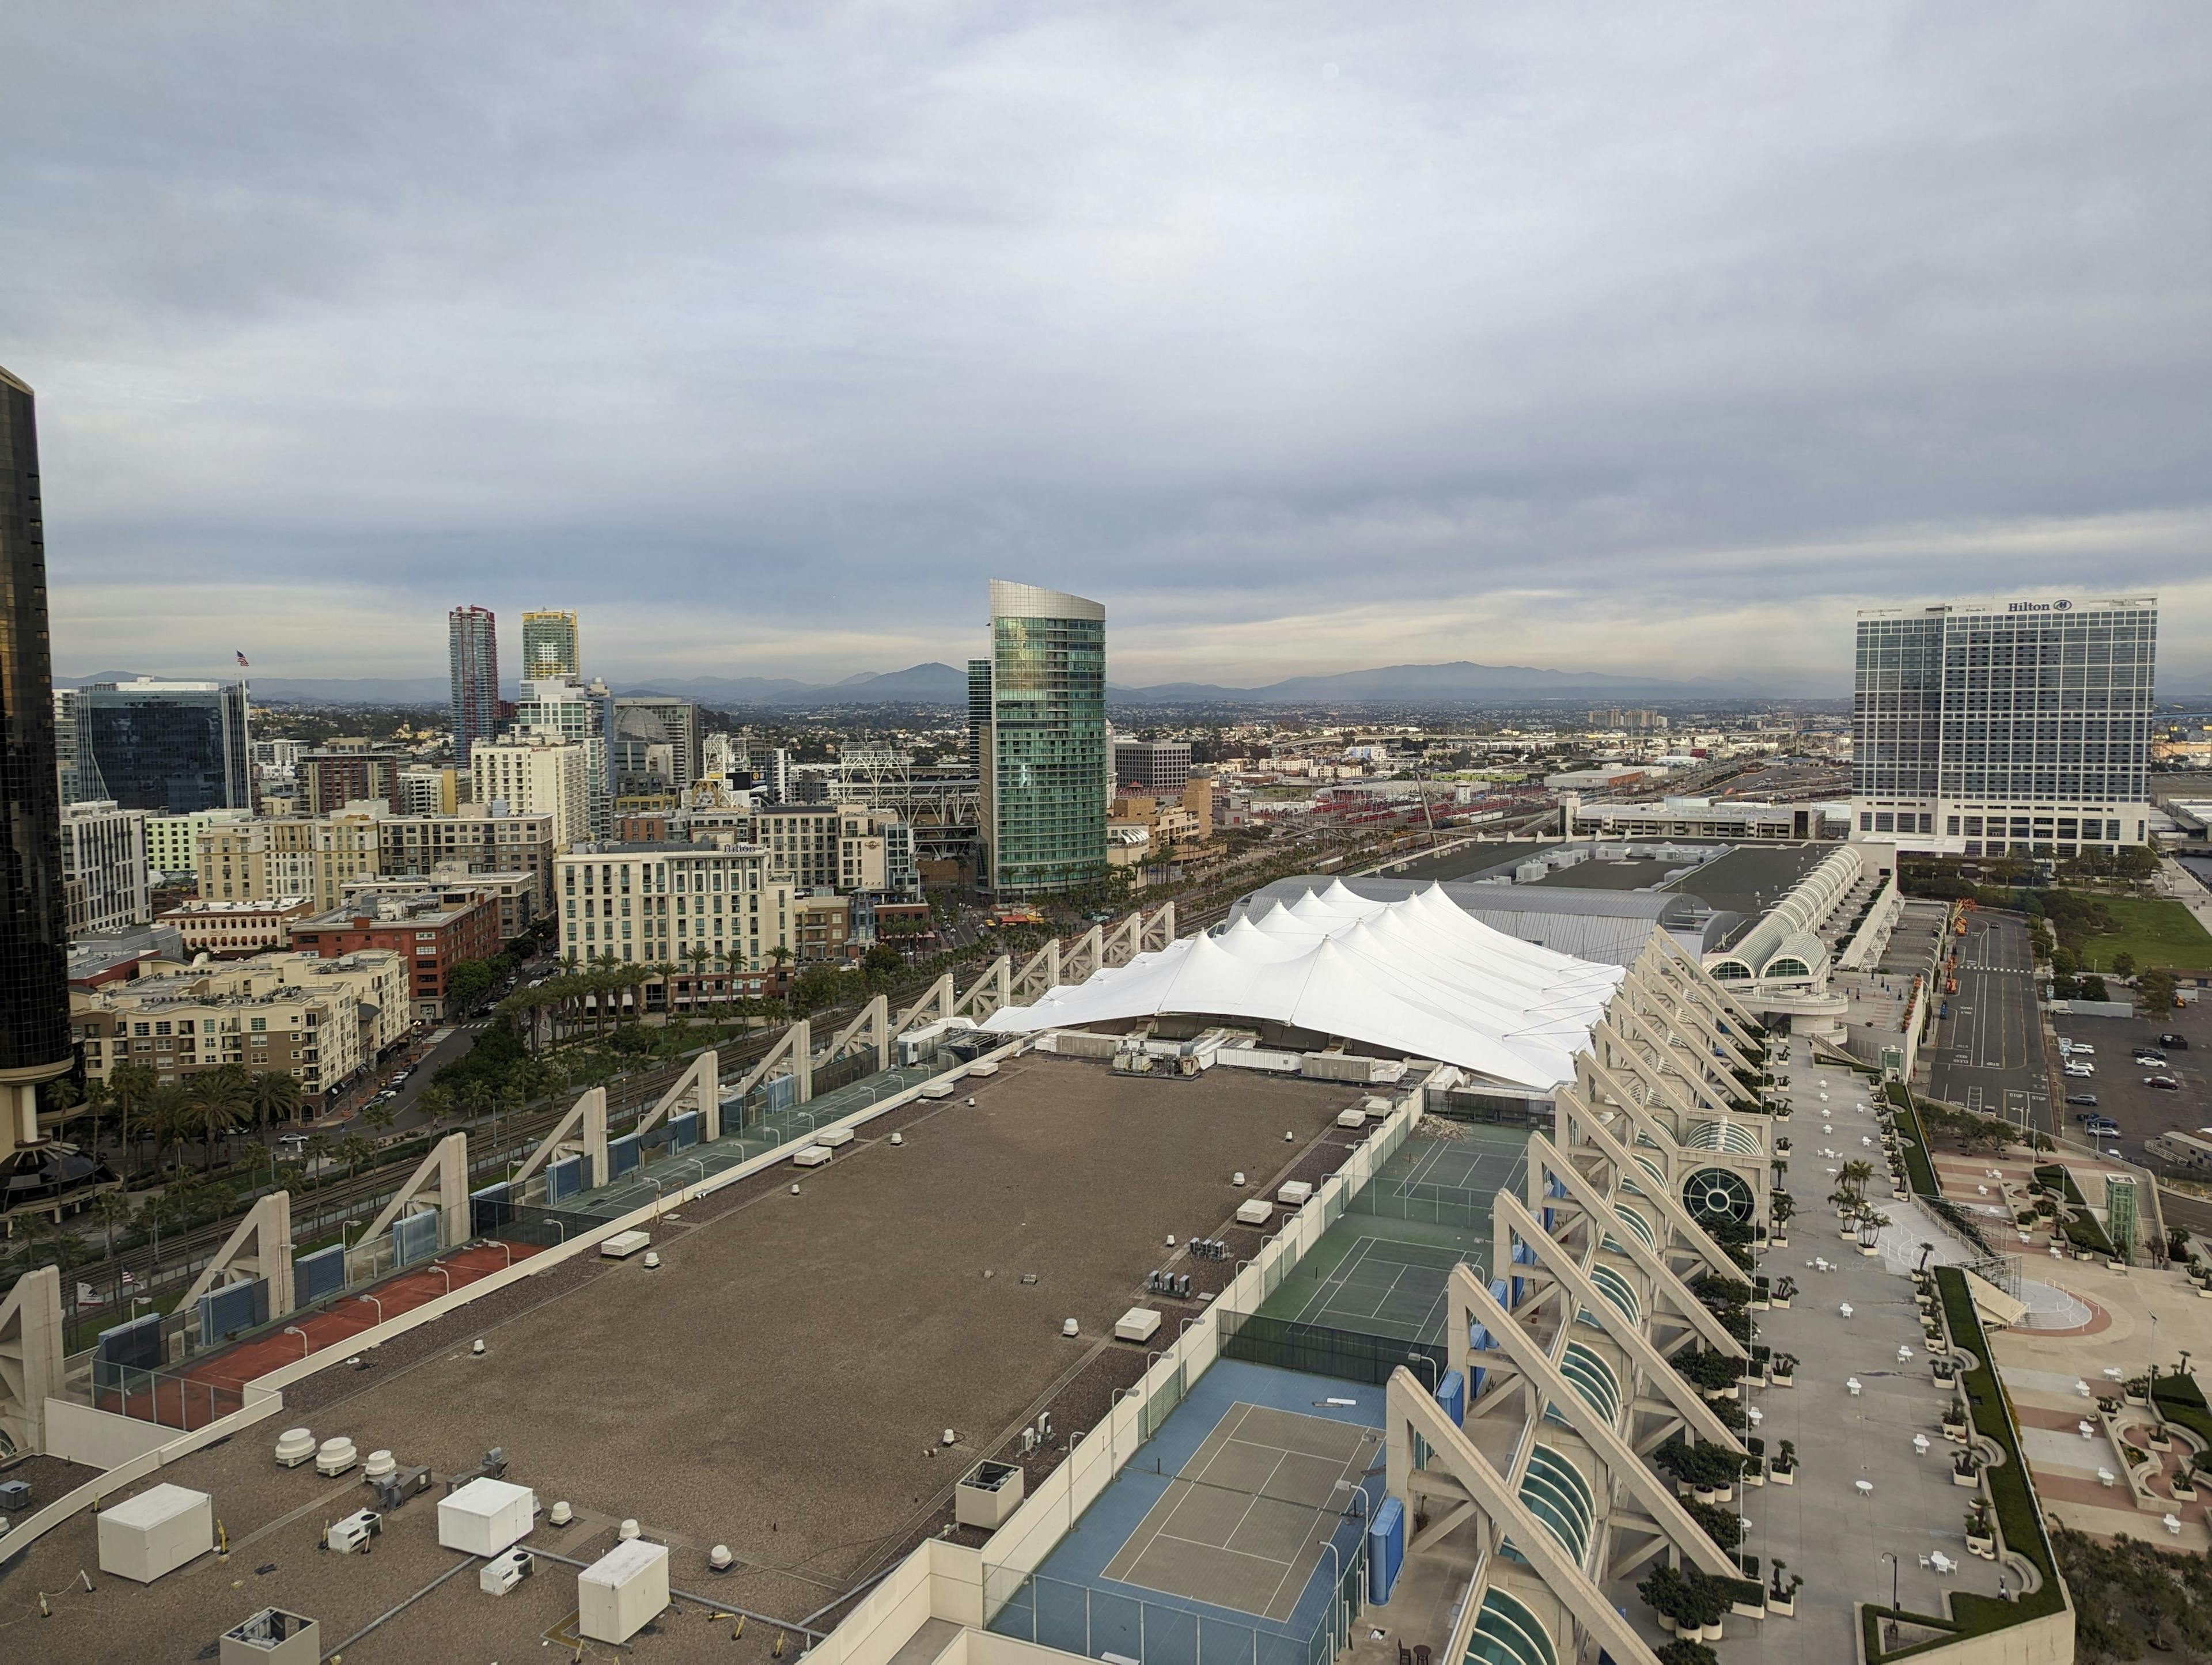 Overlooking the San Diego Convention Center | Image Credit: Patrick Lavery